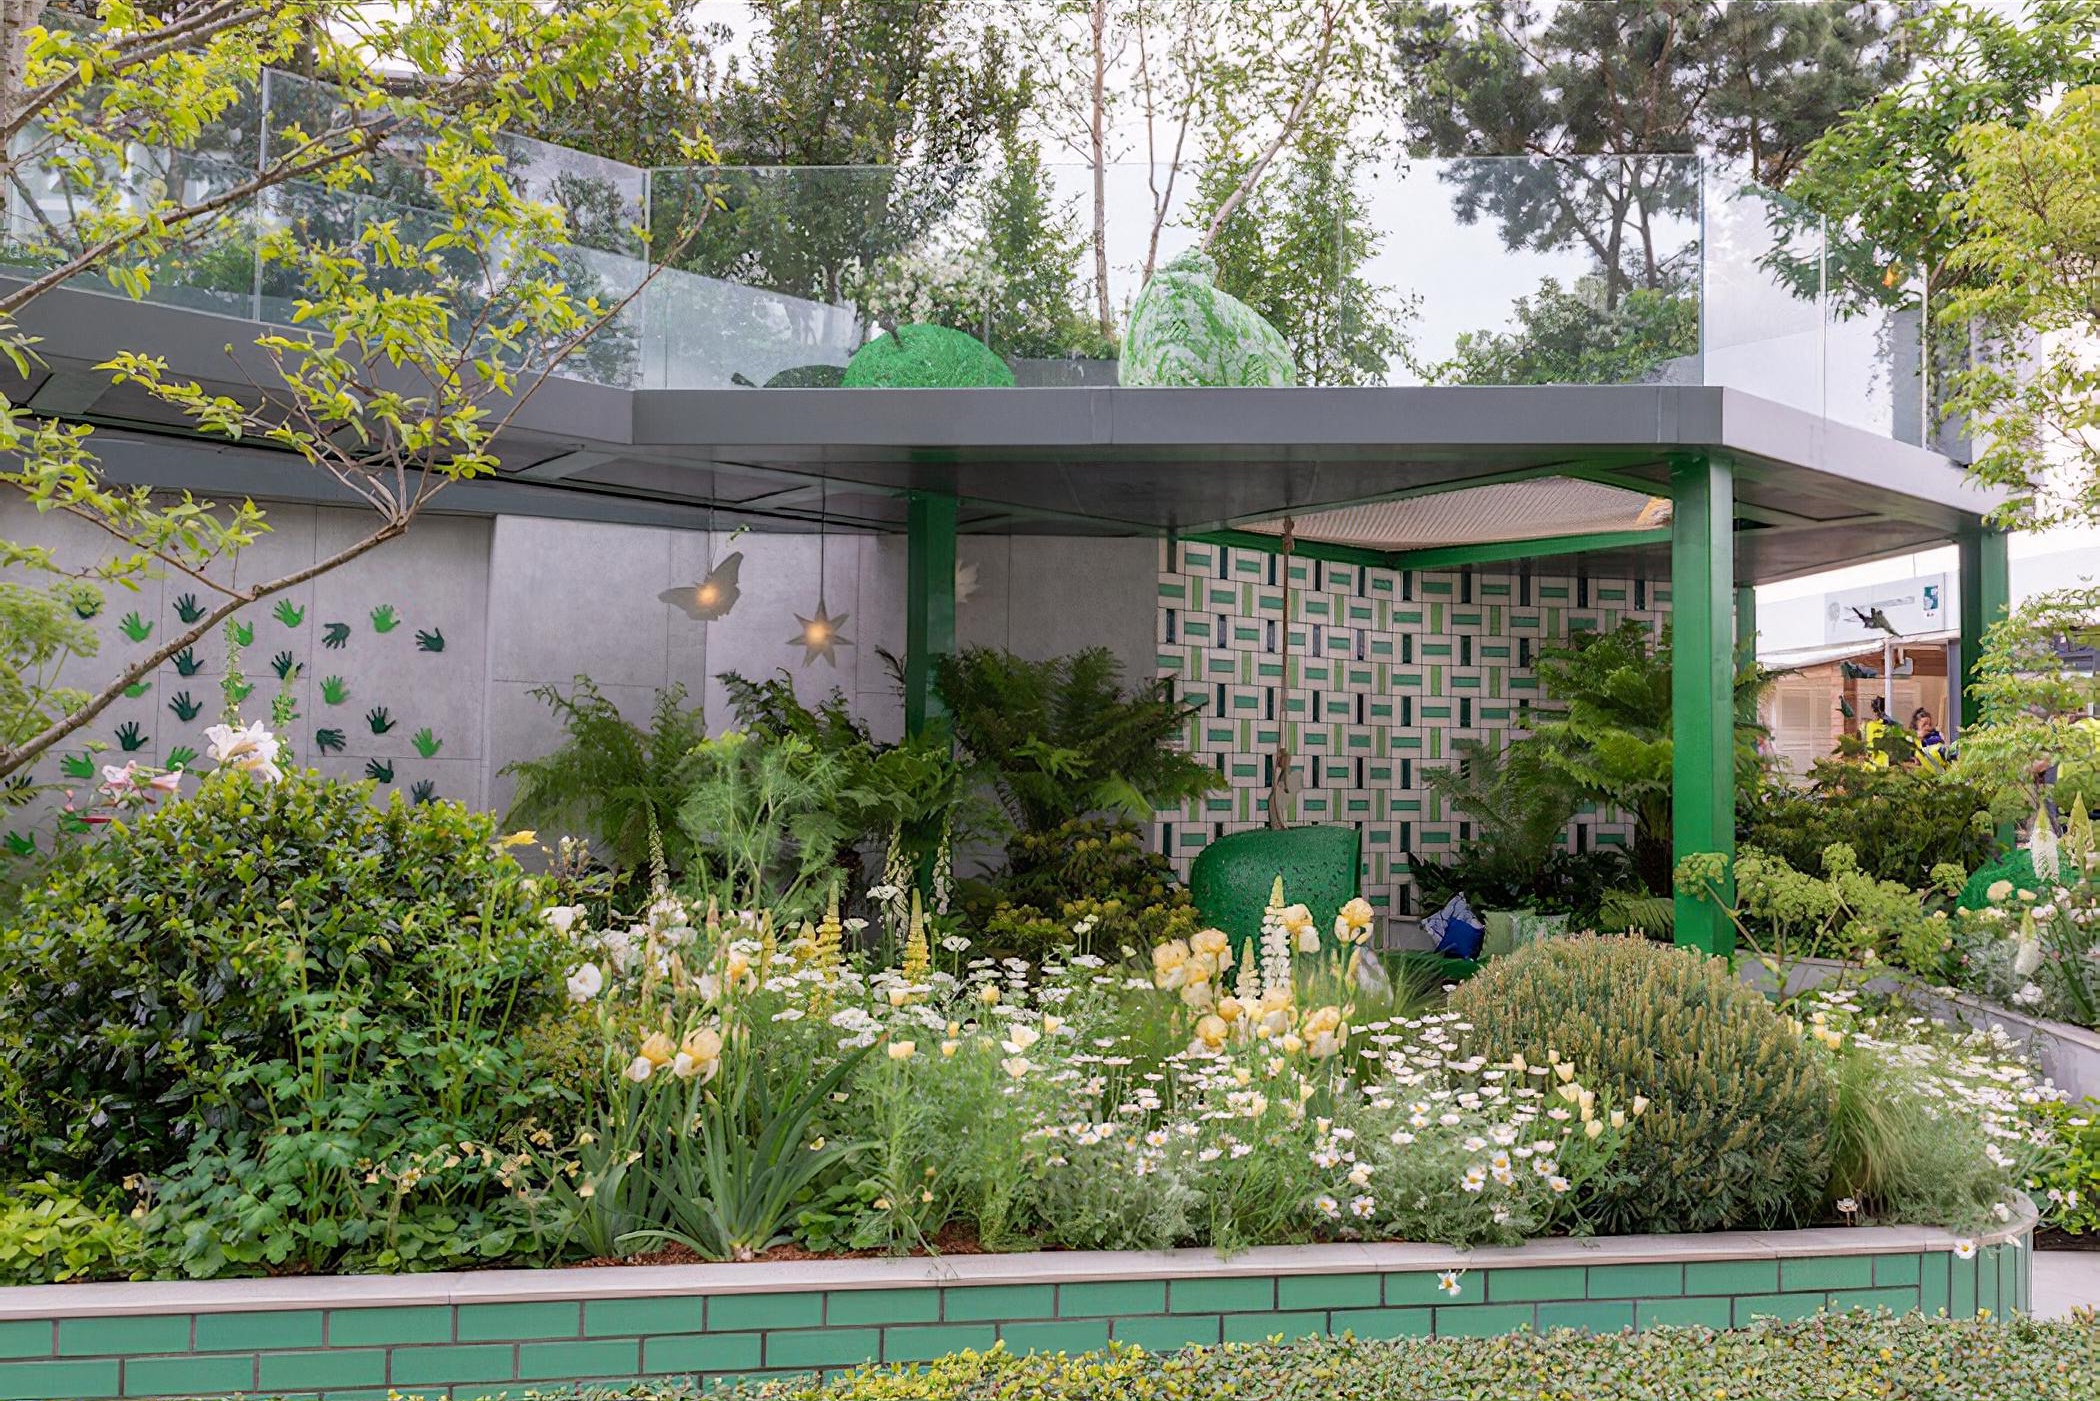 The Greenfingers Charity Garden By Kate Gould Gardens Chelsea Flower Show 2019